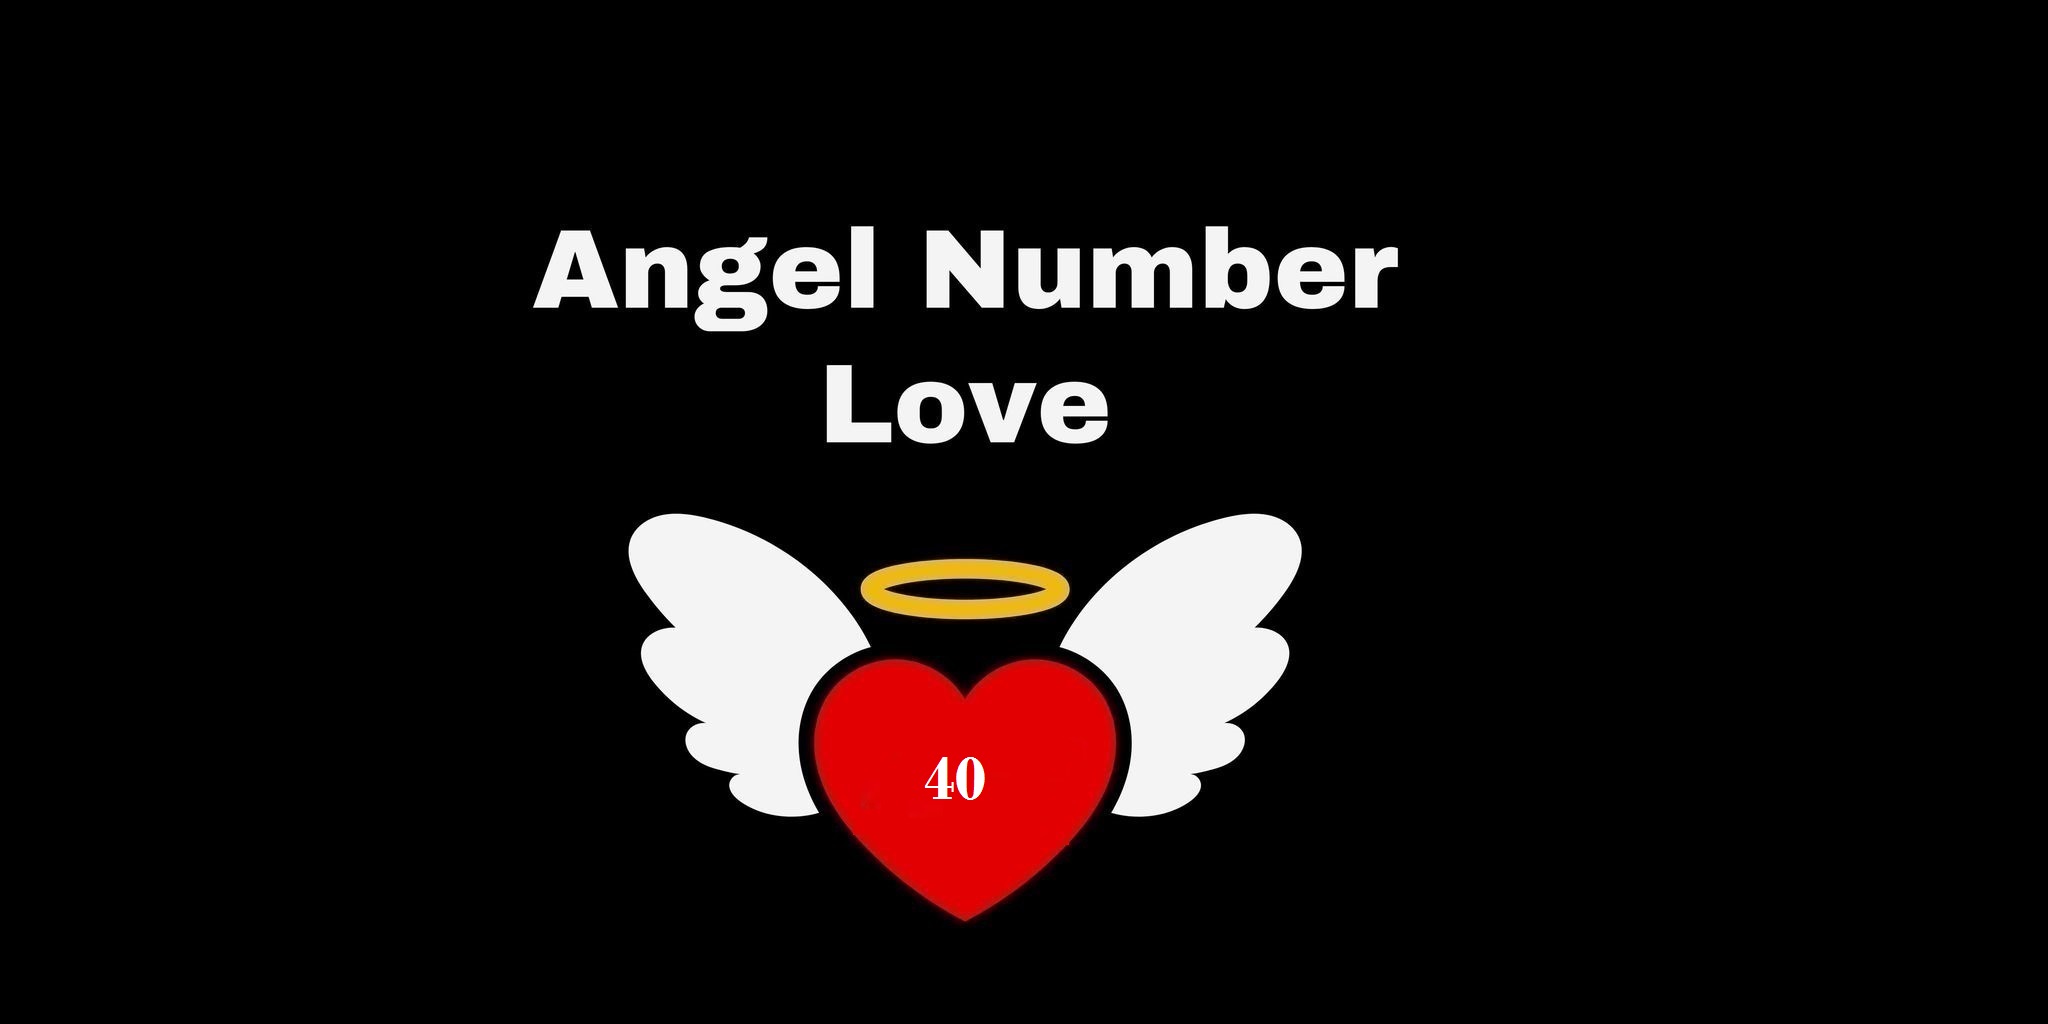 40 Angel Number Meaning In Love